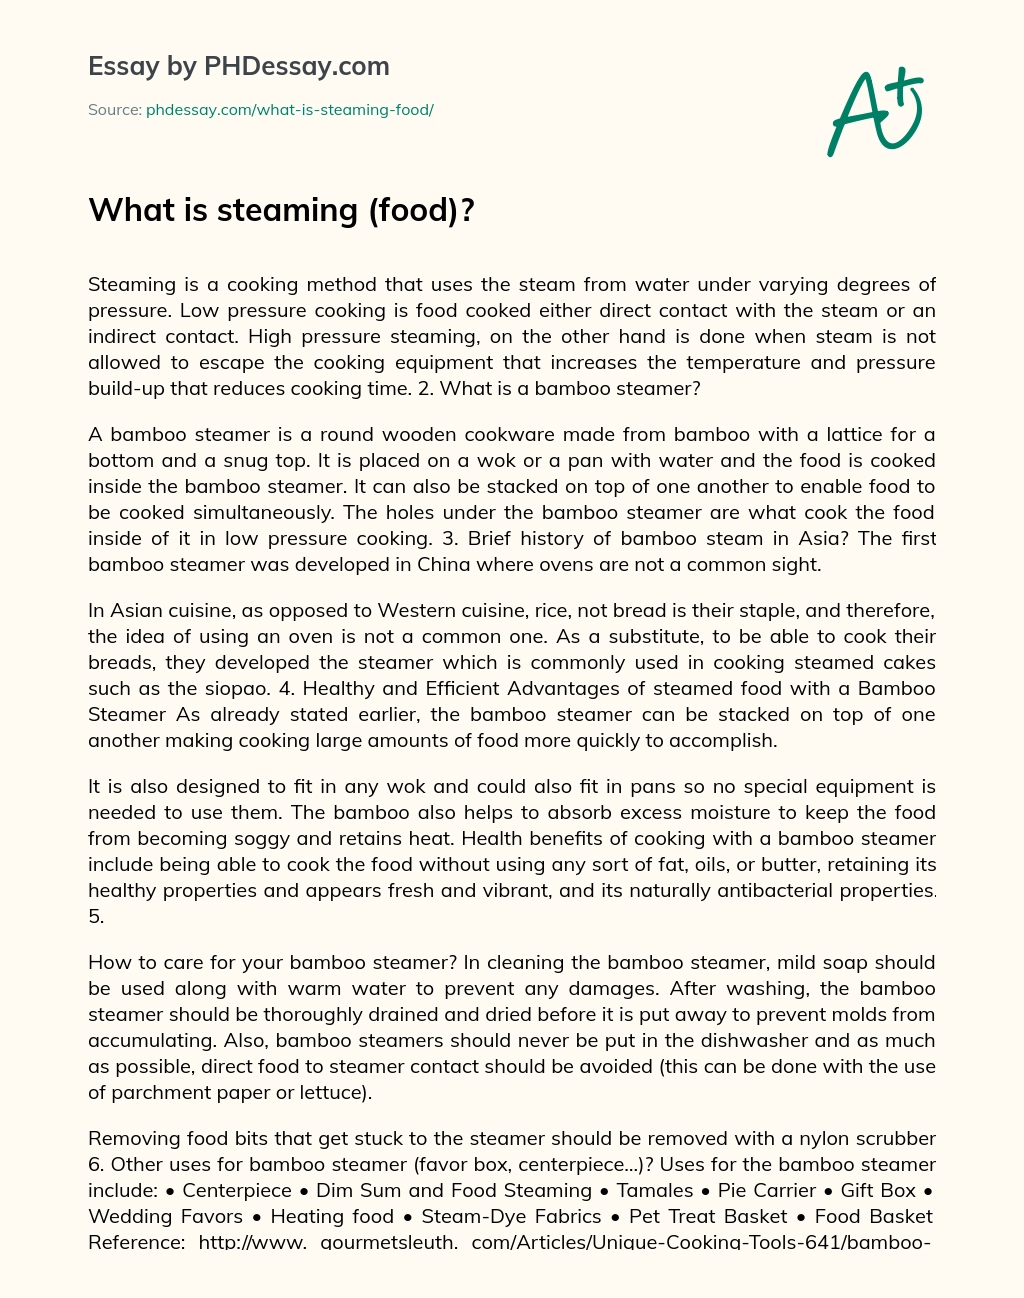 What is steaming (food)? essay